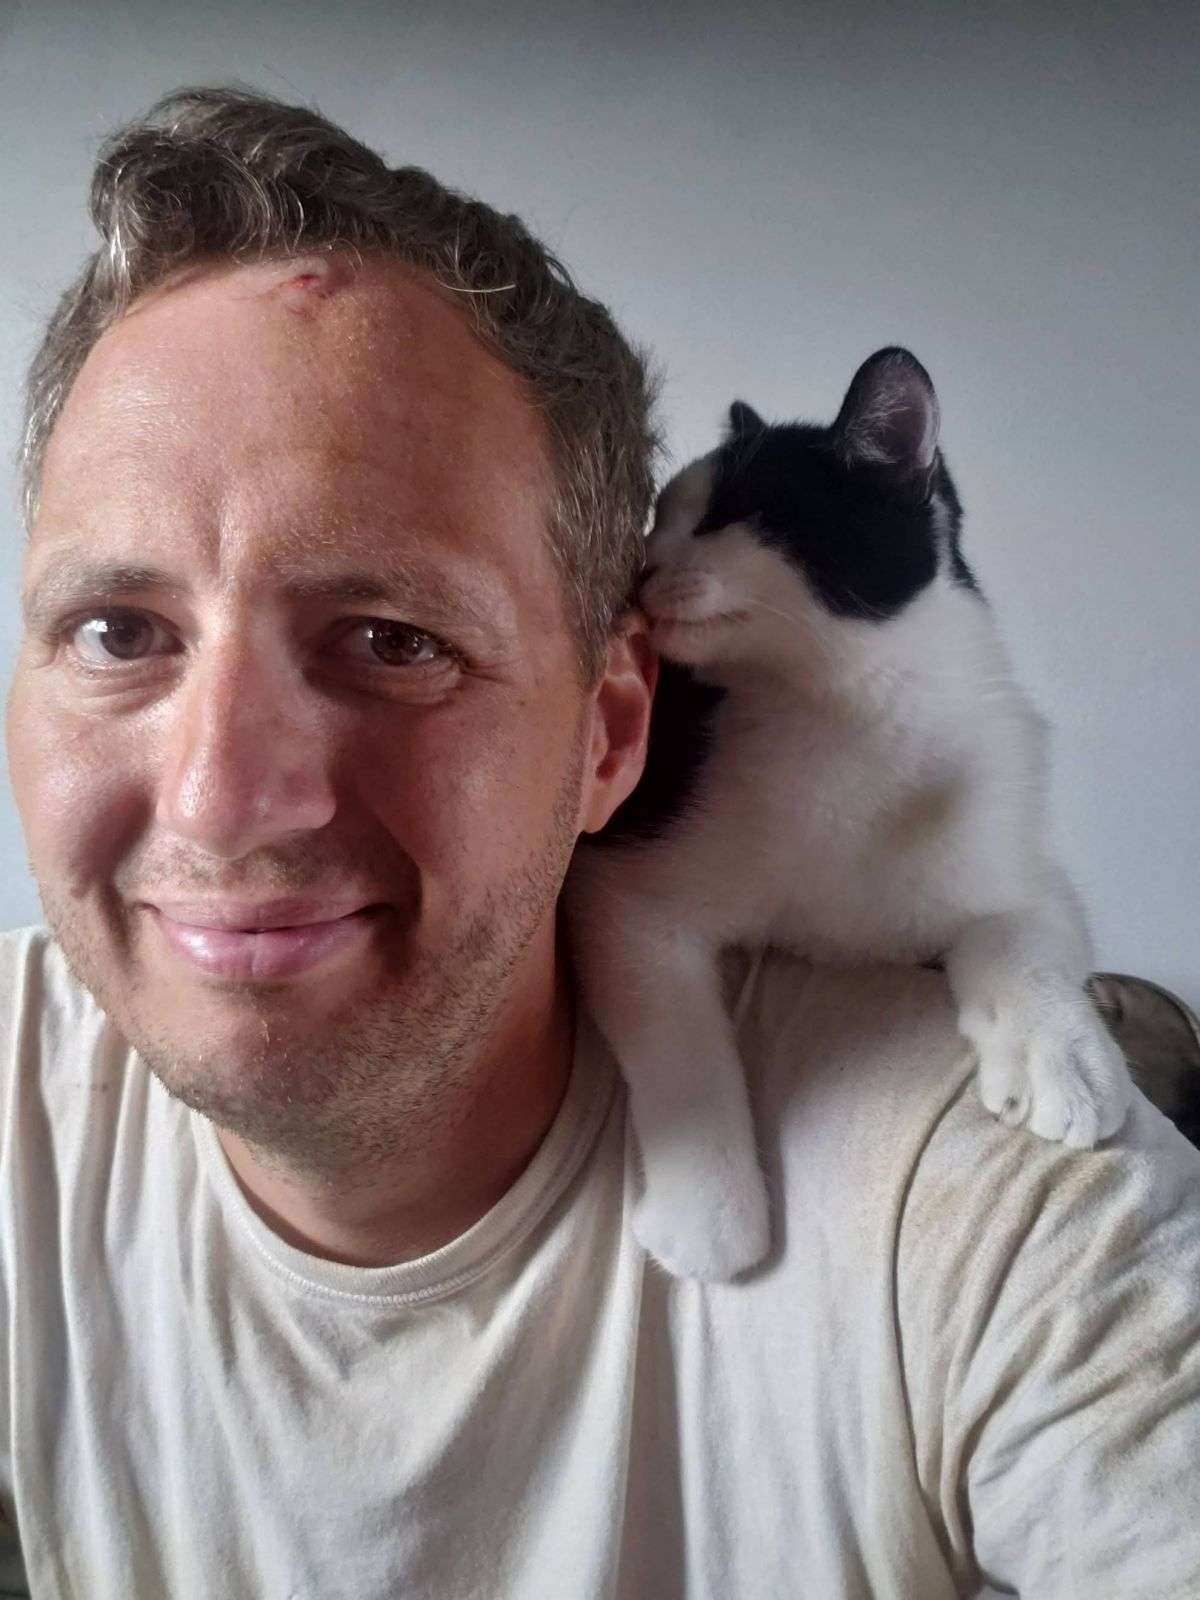 black and white kitten perches on man's shoulder.